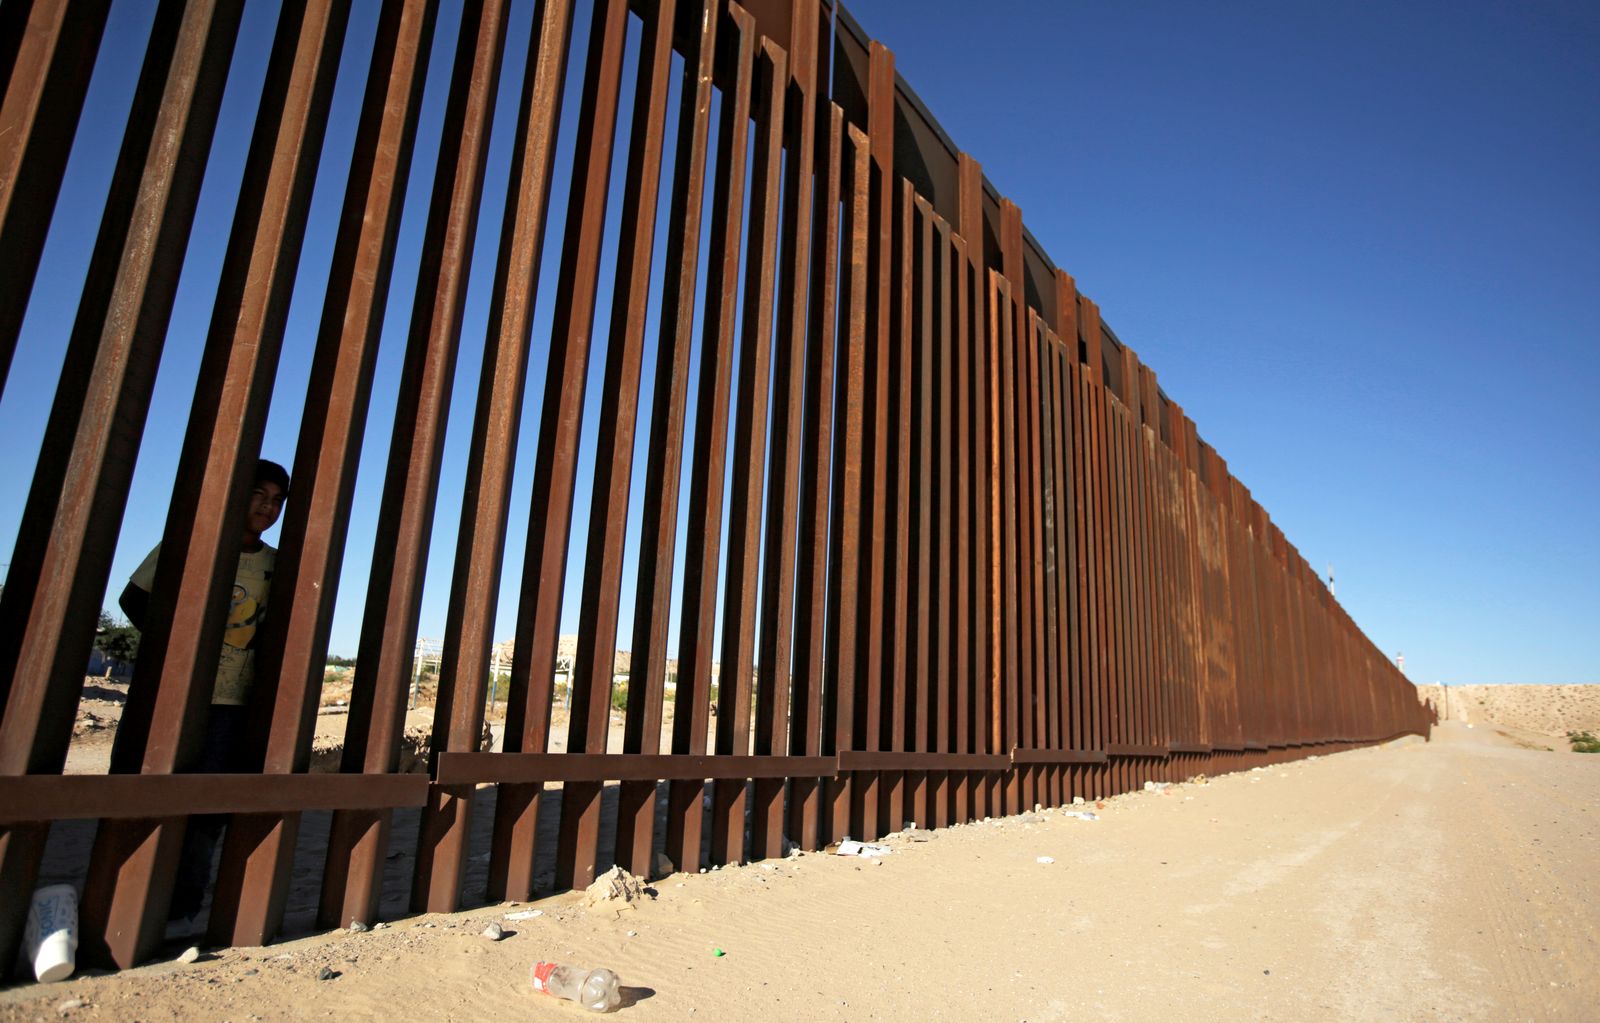 i-toured-the-texas-mexico-border-here-are-8-things-i-learned-the